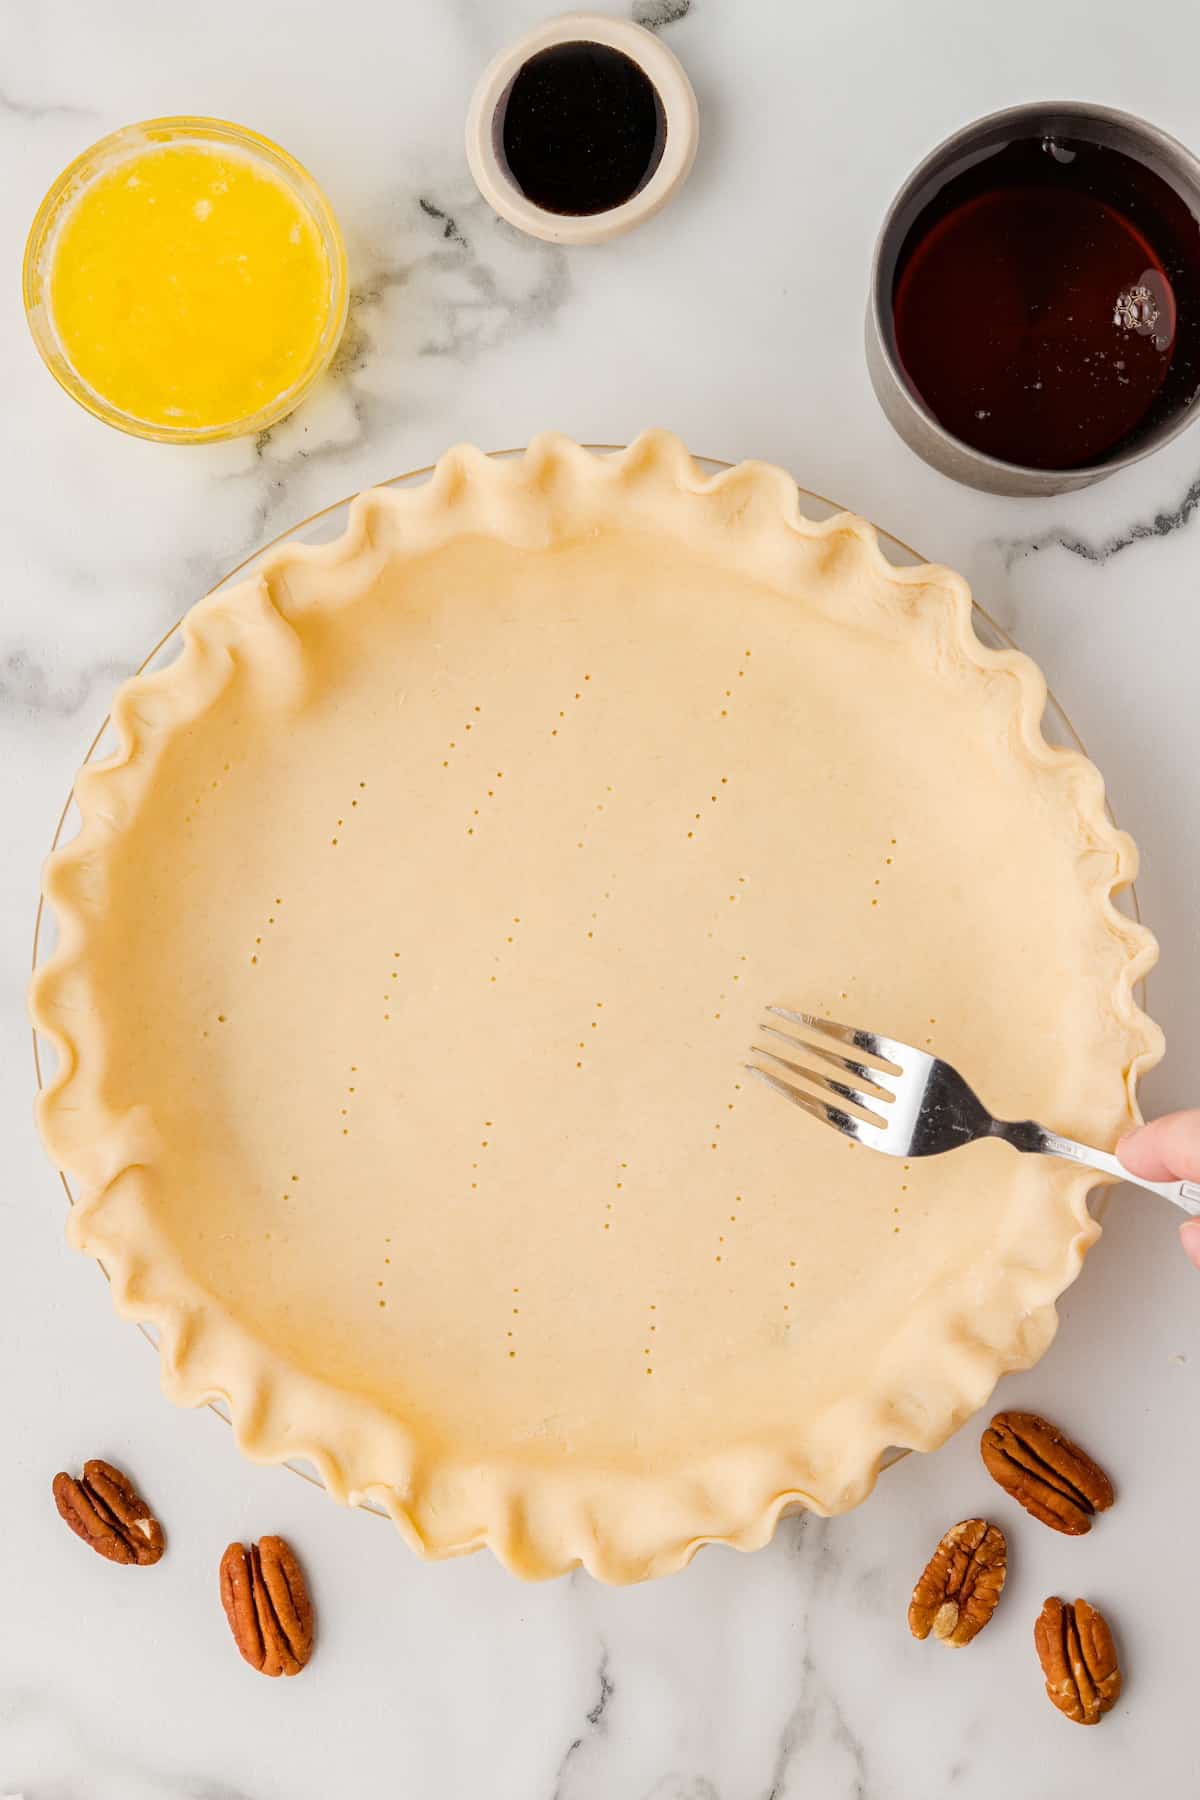 prick the unbaked pie crust with a fork